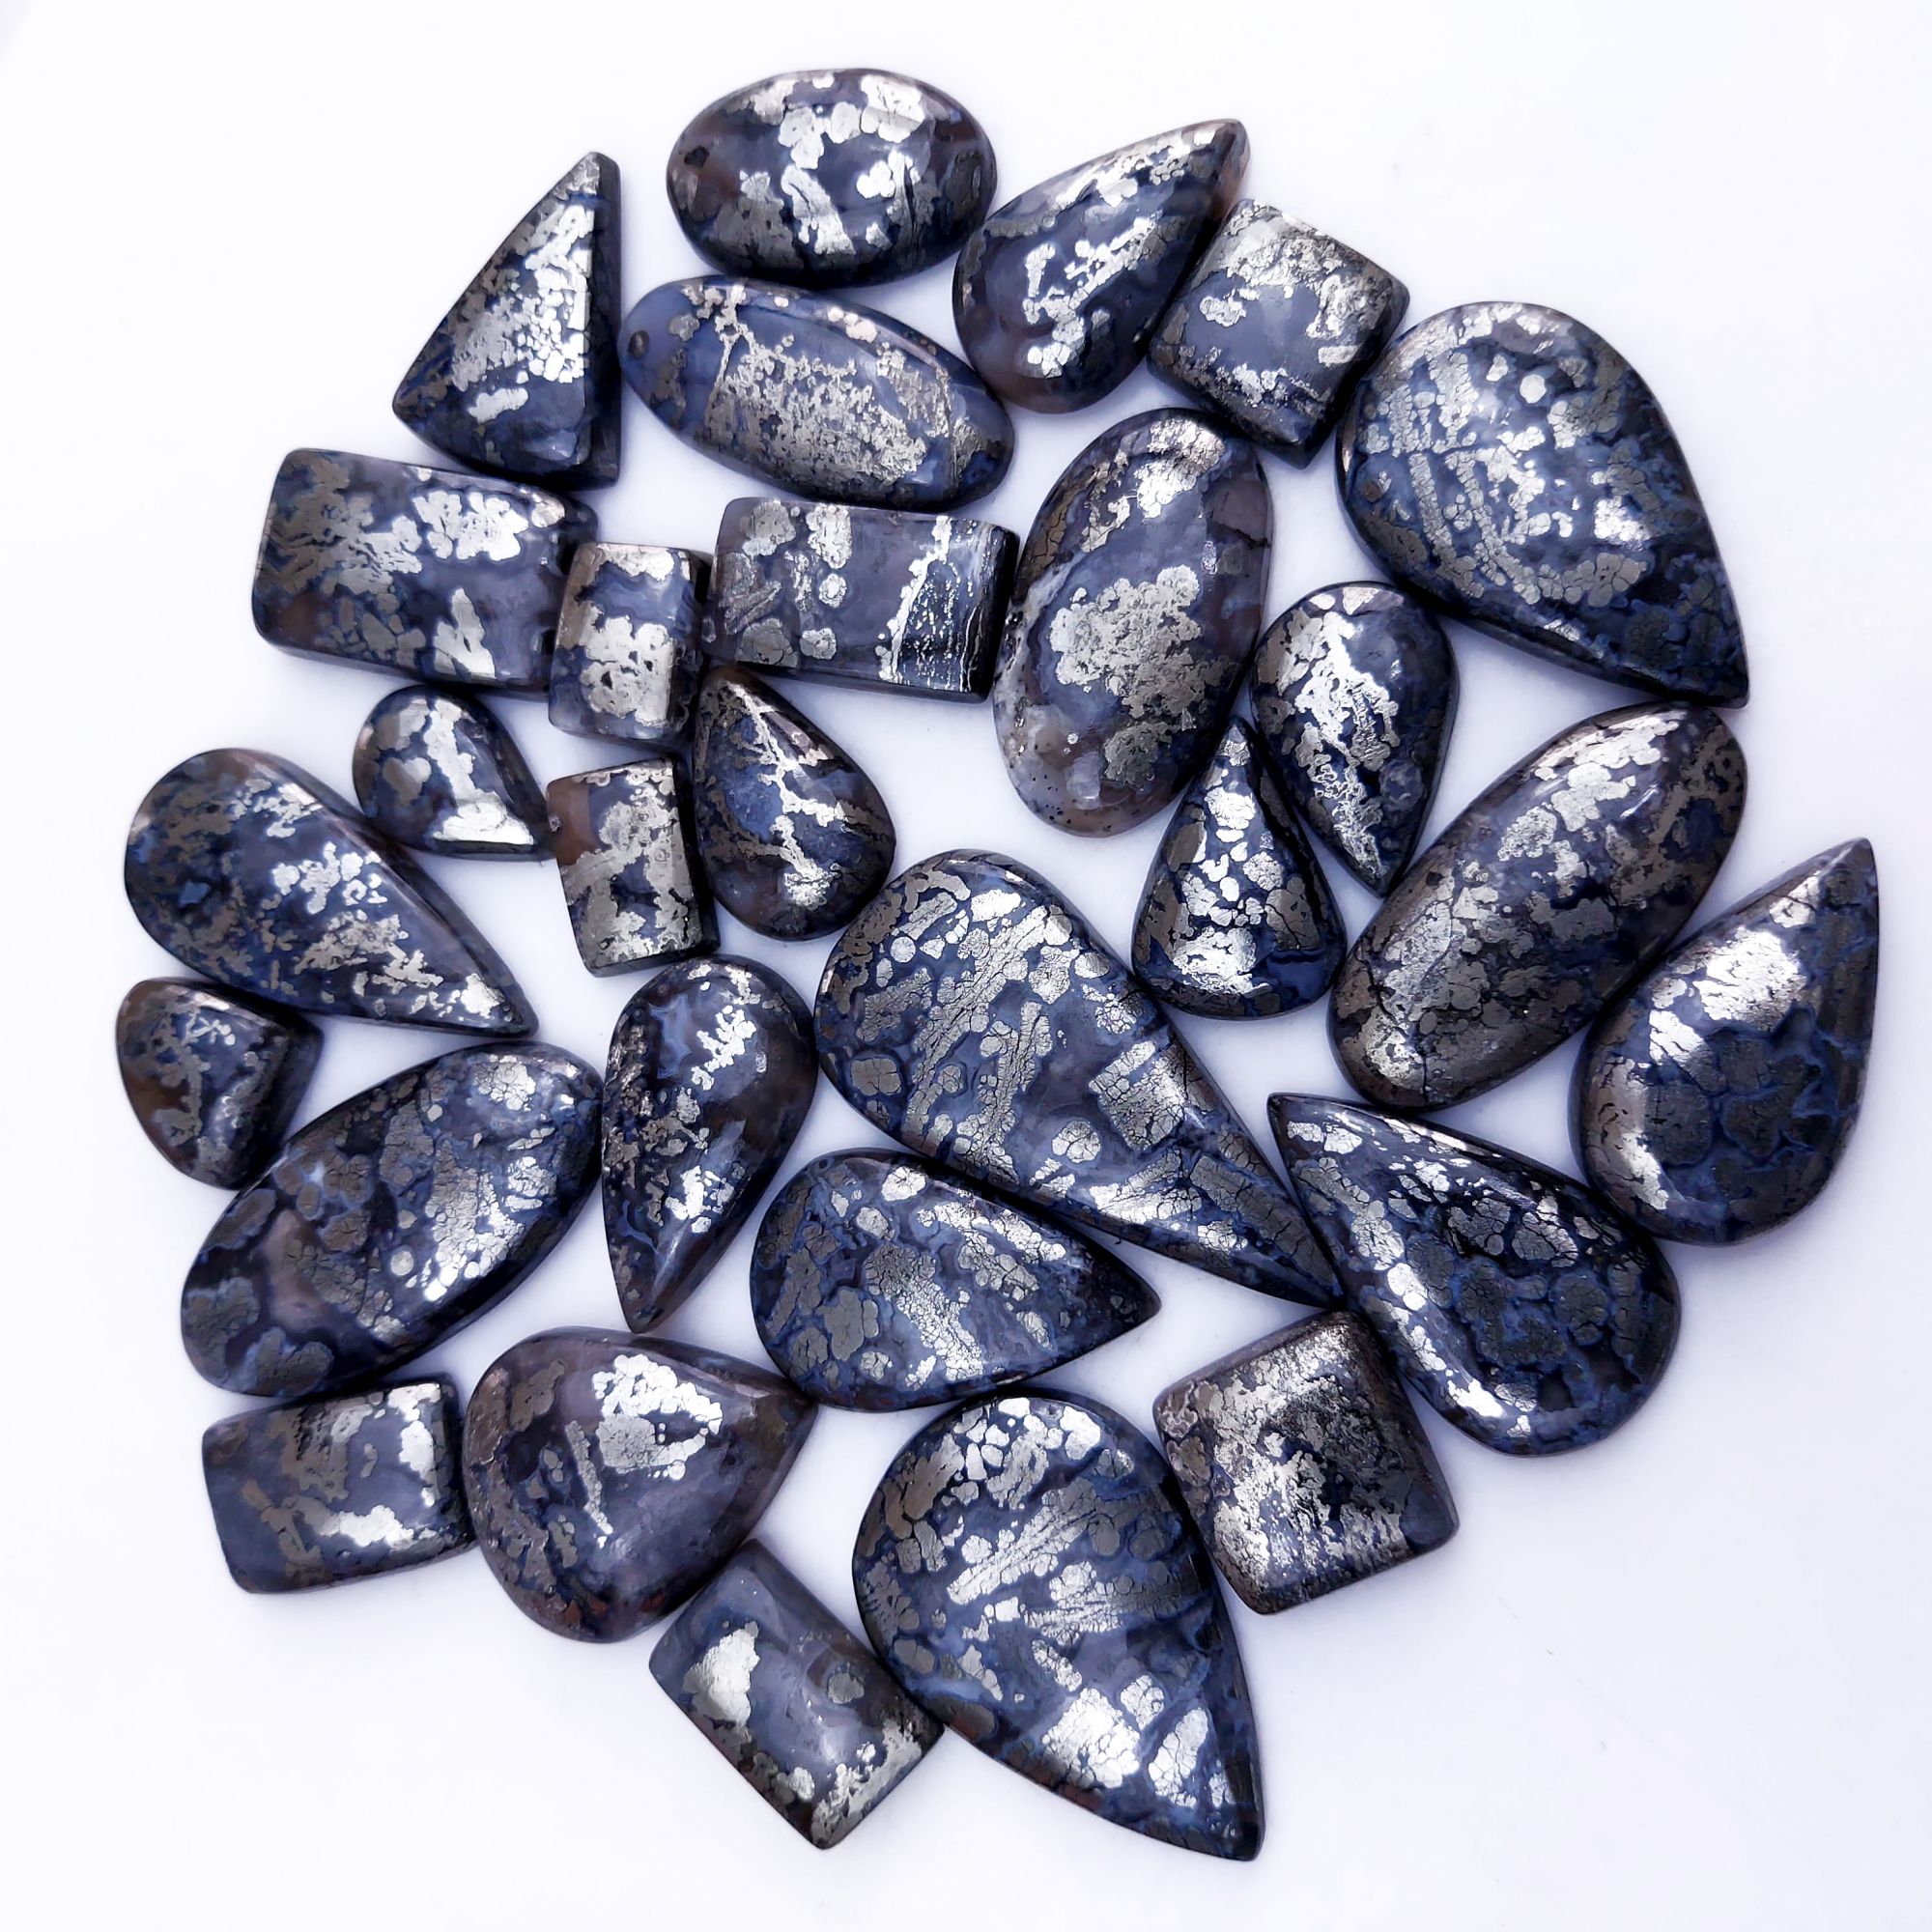 29Pcs 767Cts Natural Marcasite Grey Cabochon Back Side Unpolished Gemstone Semi-Precious Gemstones For Jewelry Making 44x20 20x12mm #10043